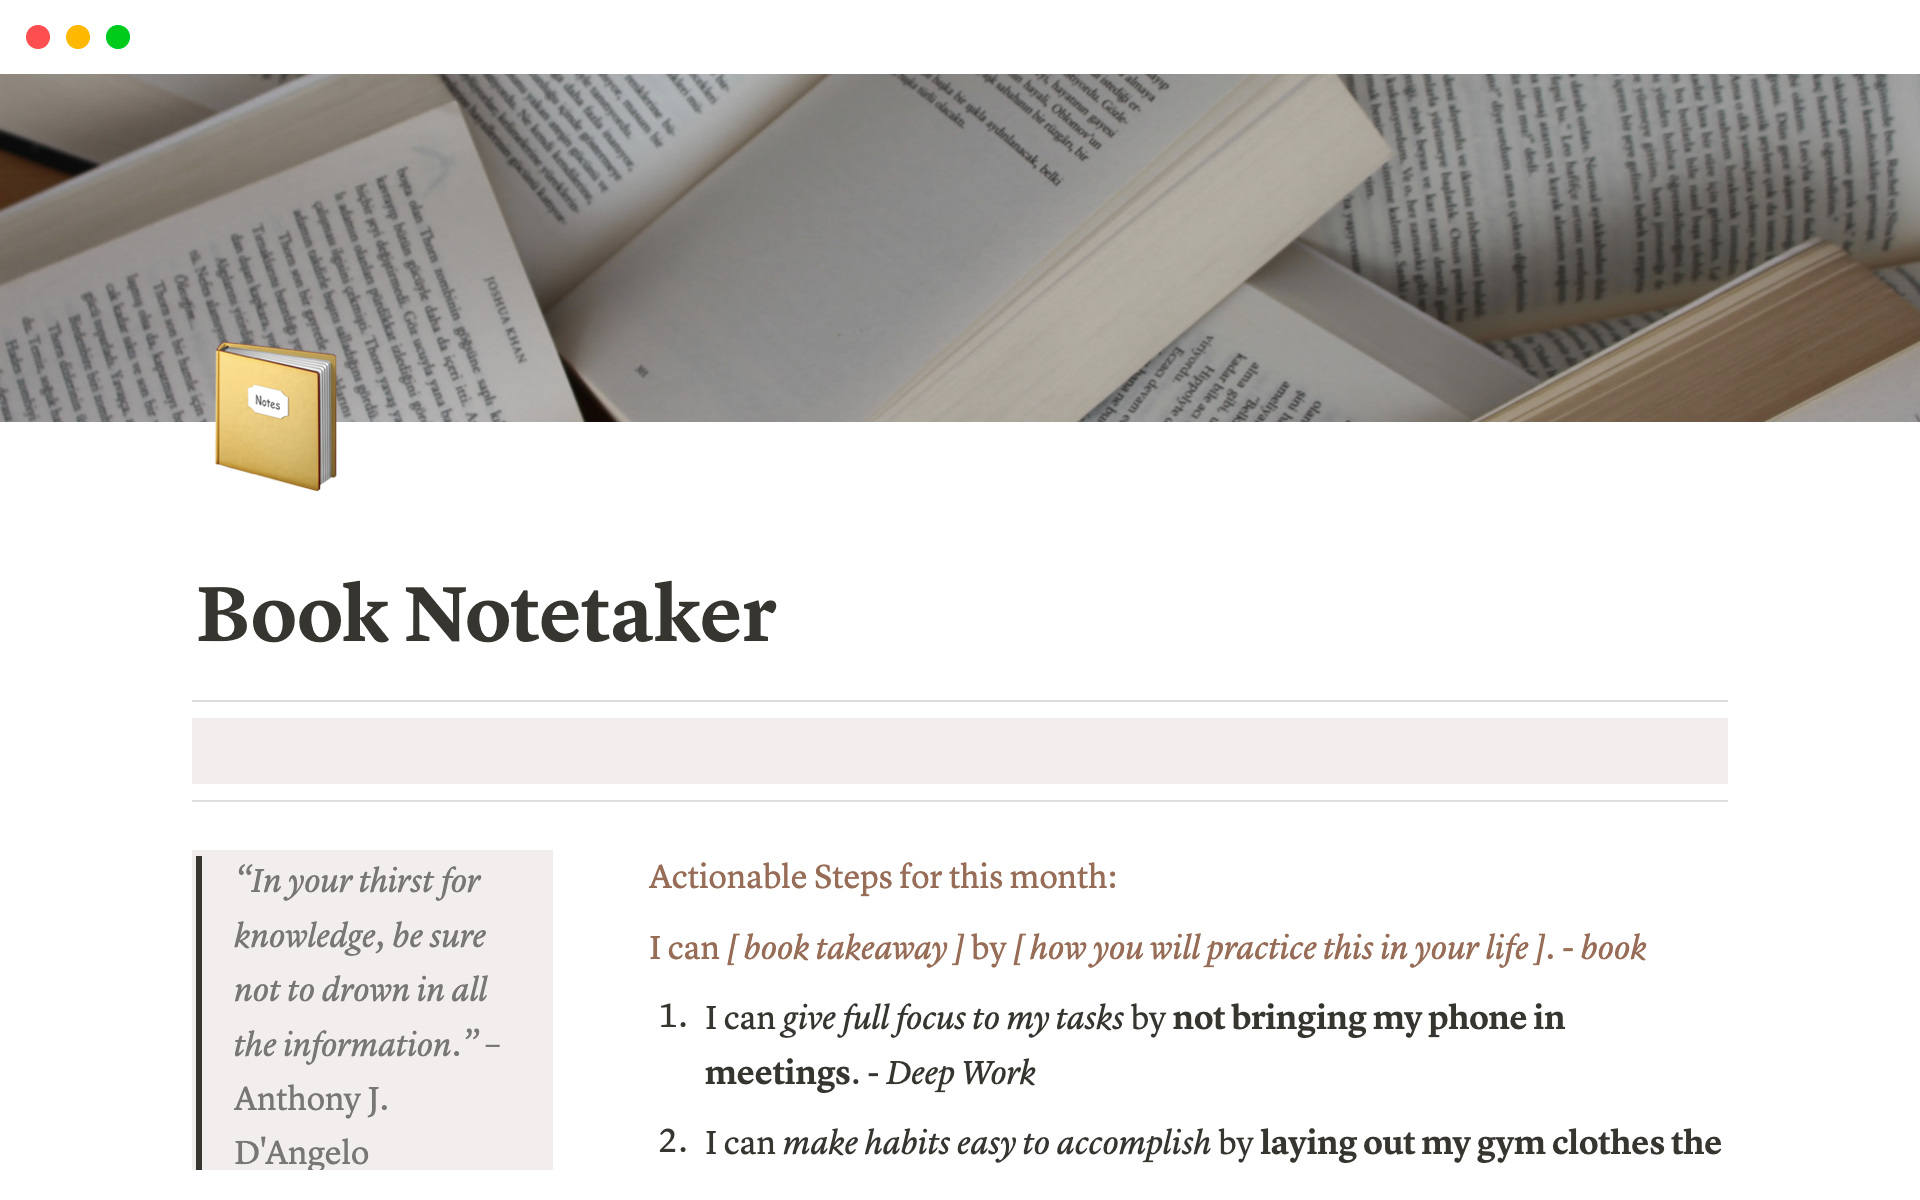 Book Note-taking on Notion | Intuitive and Understandable Template님의 템플릿 미리보기